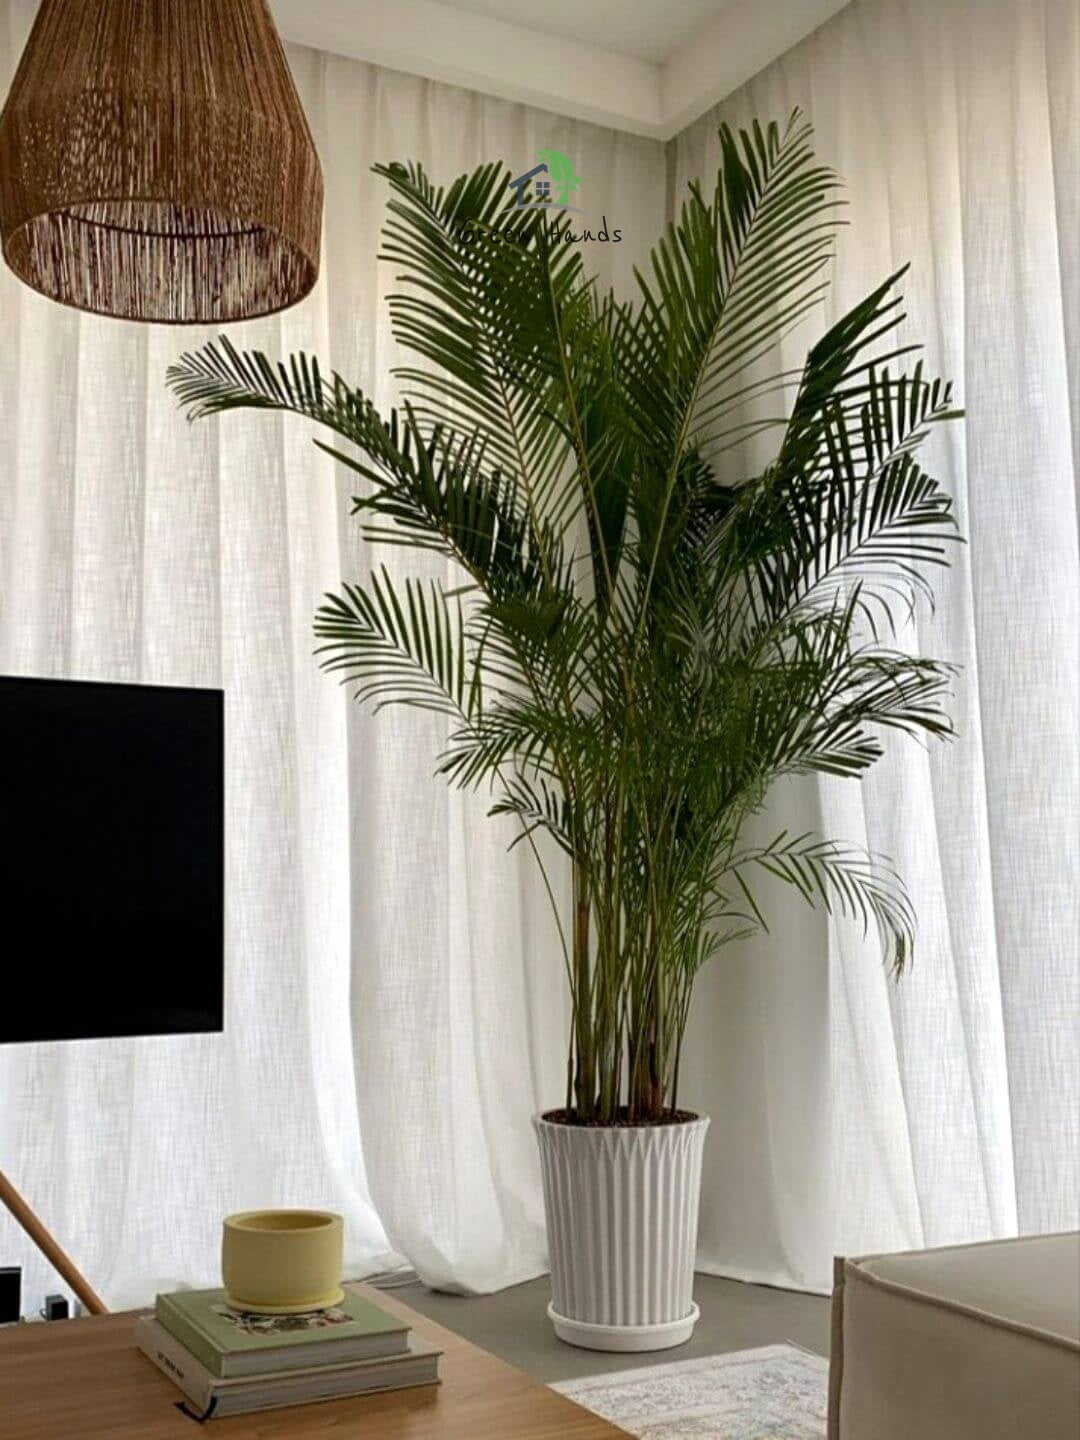 Potted XL-XXL Areca Palms 170-190 cm Planted in Ceramic Pot White Finished